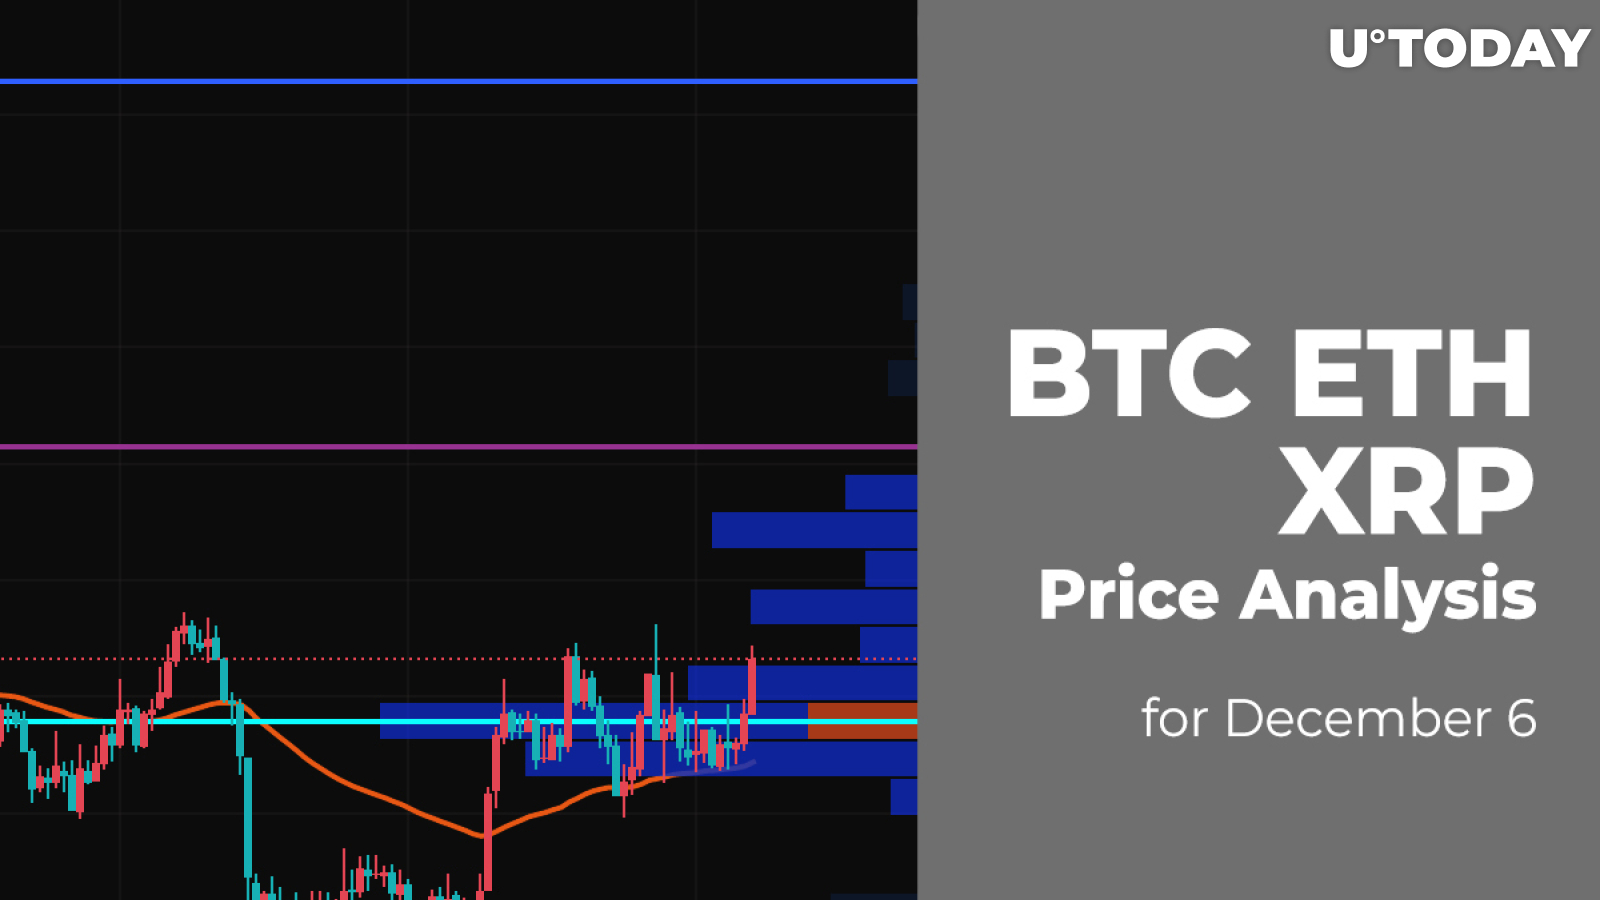 BTC, ETH, and XRP Price Analysis for December 6